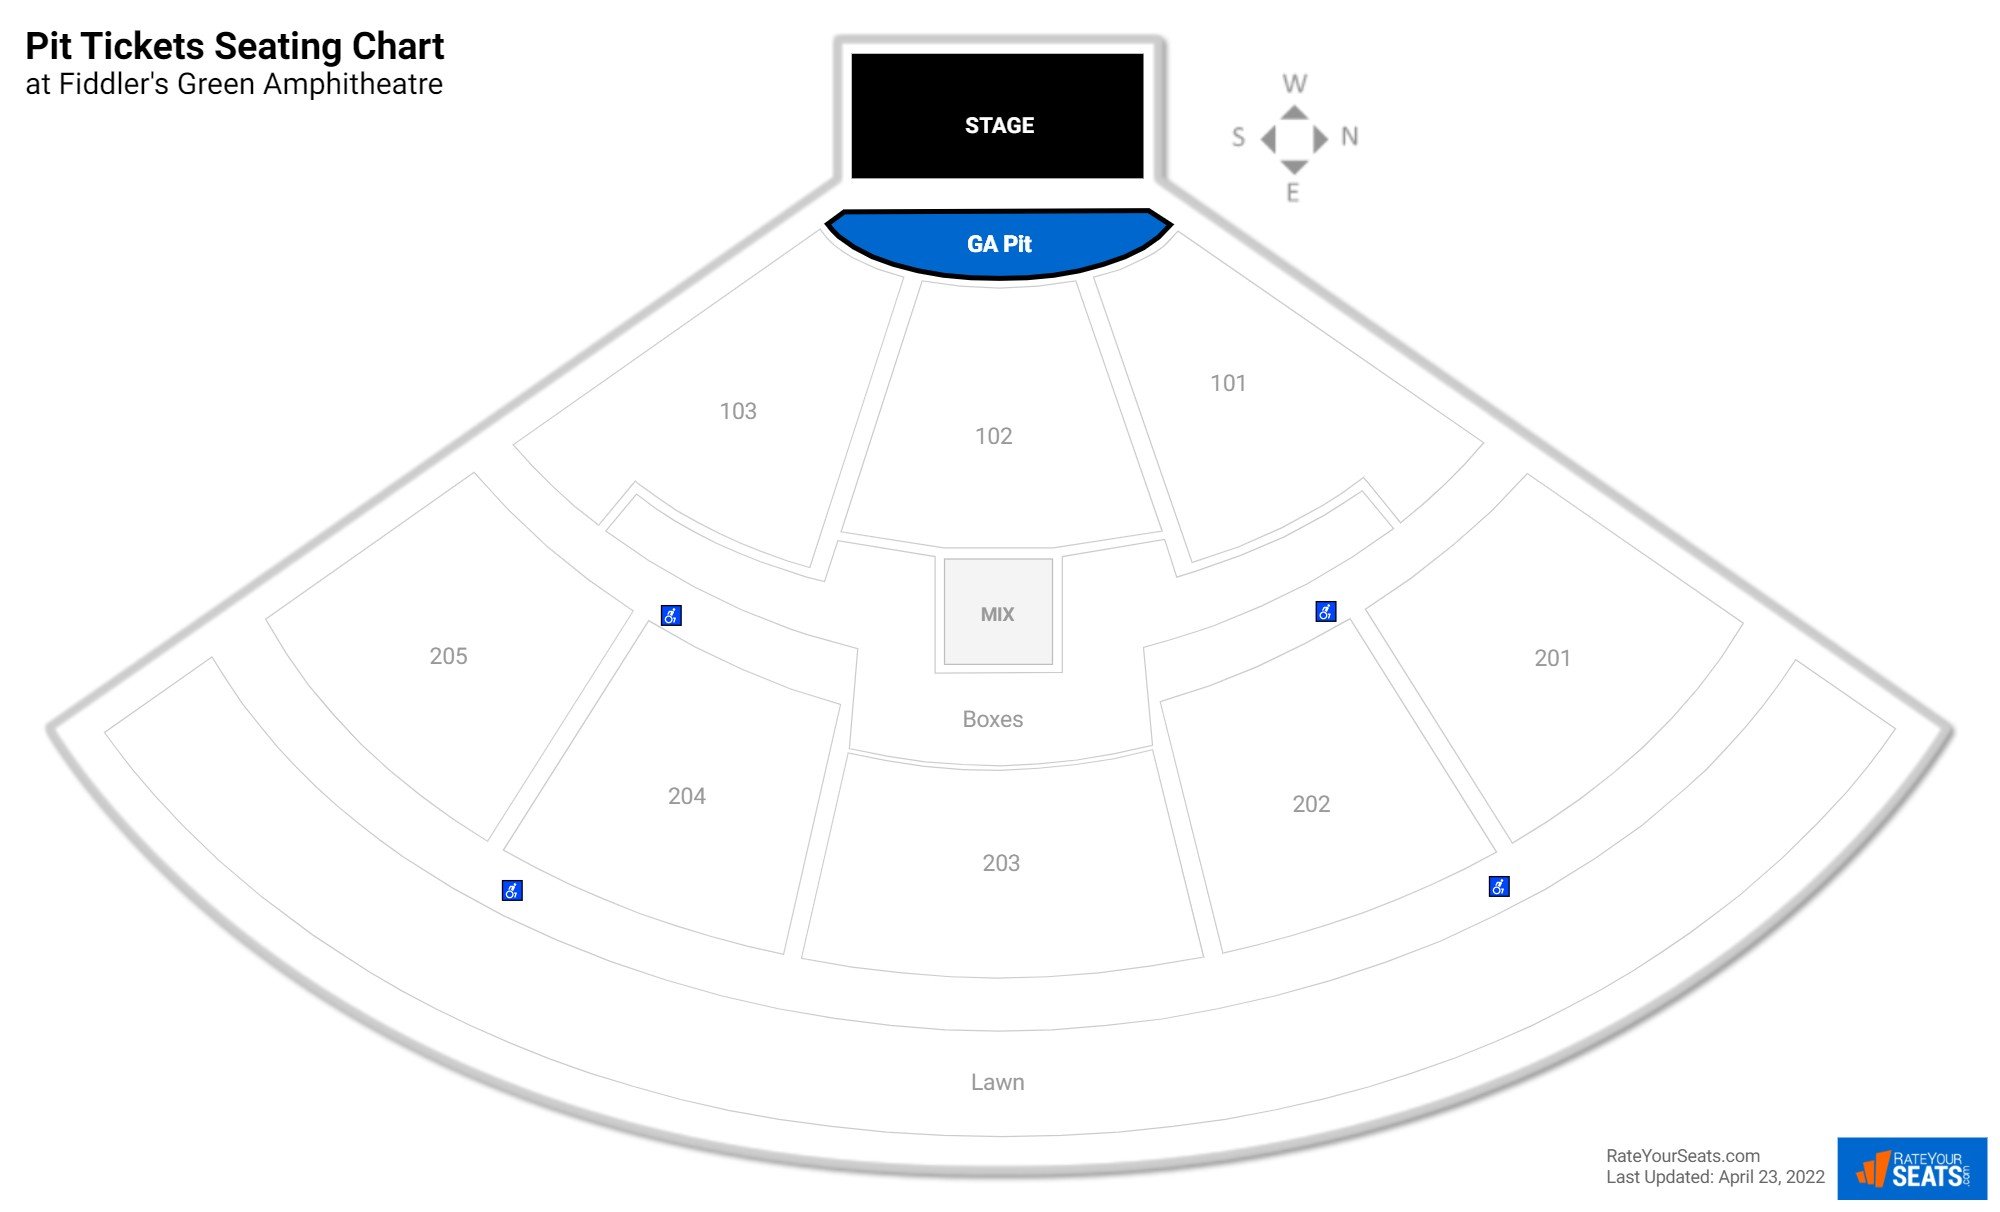 Concert Pit Tickets Seating Chart at Fiddler